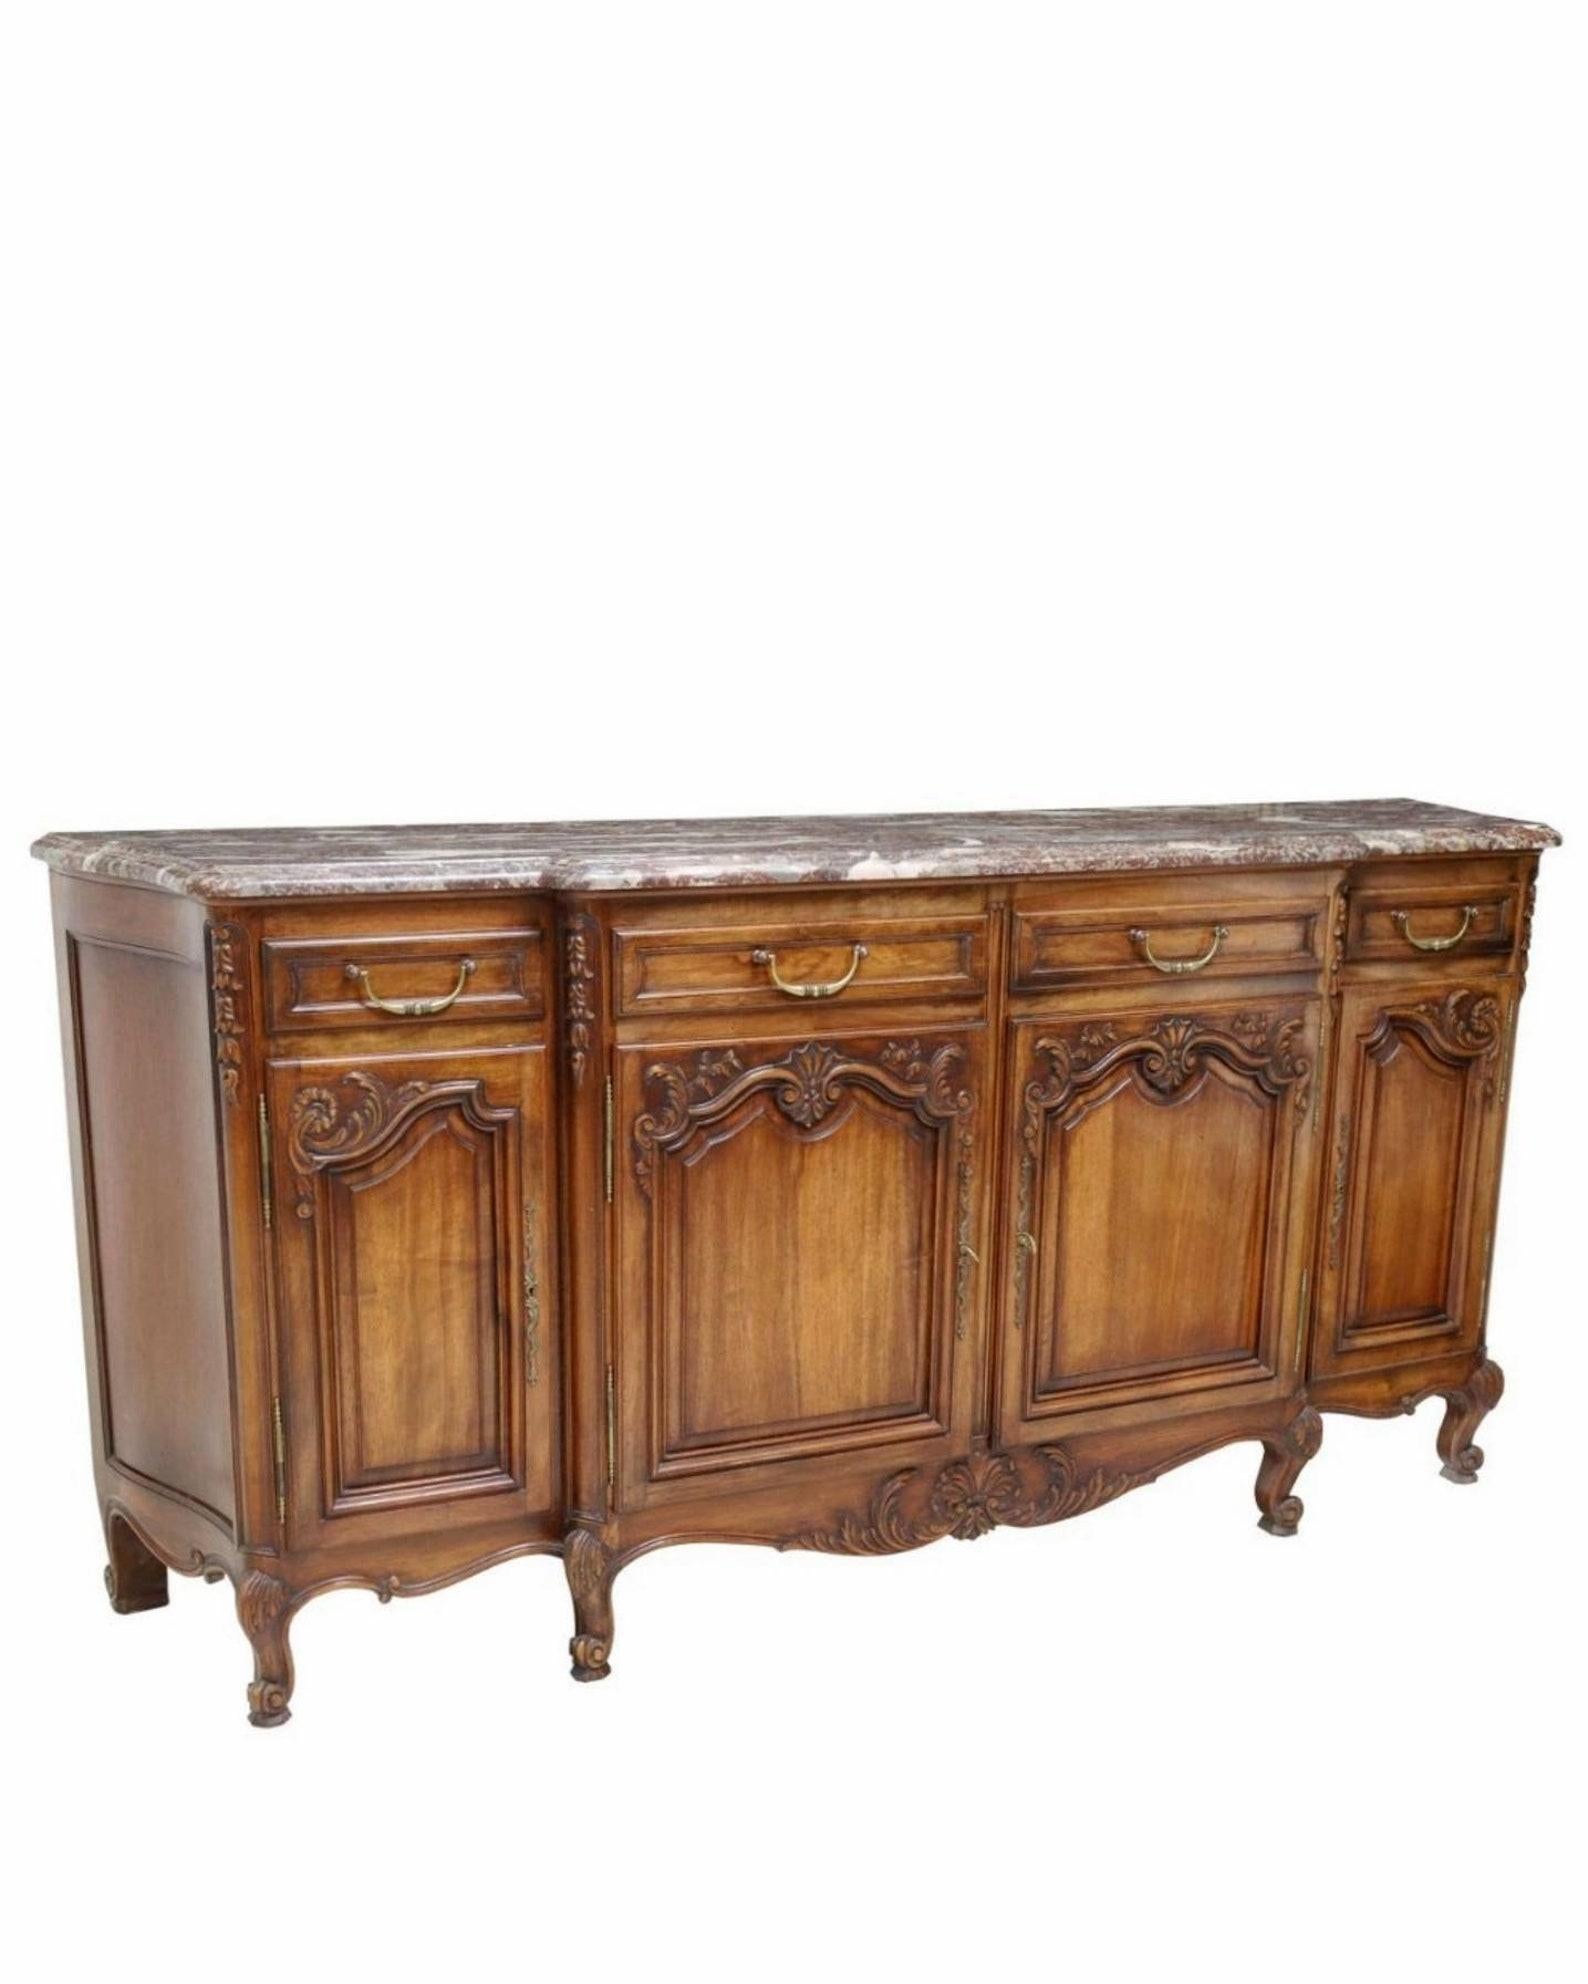 A vintage French Provincial Louis XV style carved walnut sideboard.

Hand-crafted in France in the mid-20th century, excellent quality, exceptionally executed in timeless 18th century Louis XV Regence taste, having a shaped marble top with